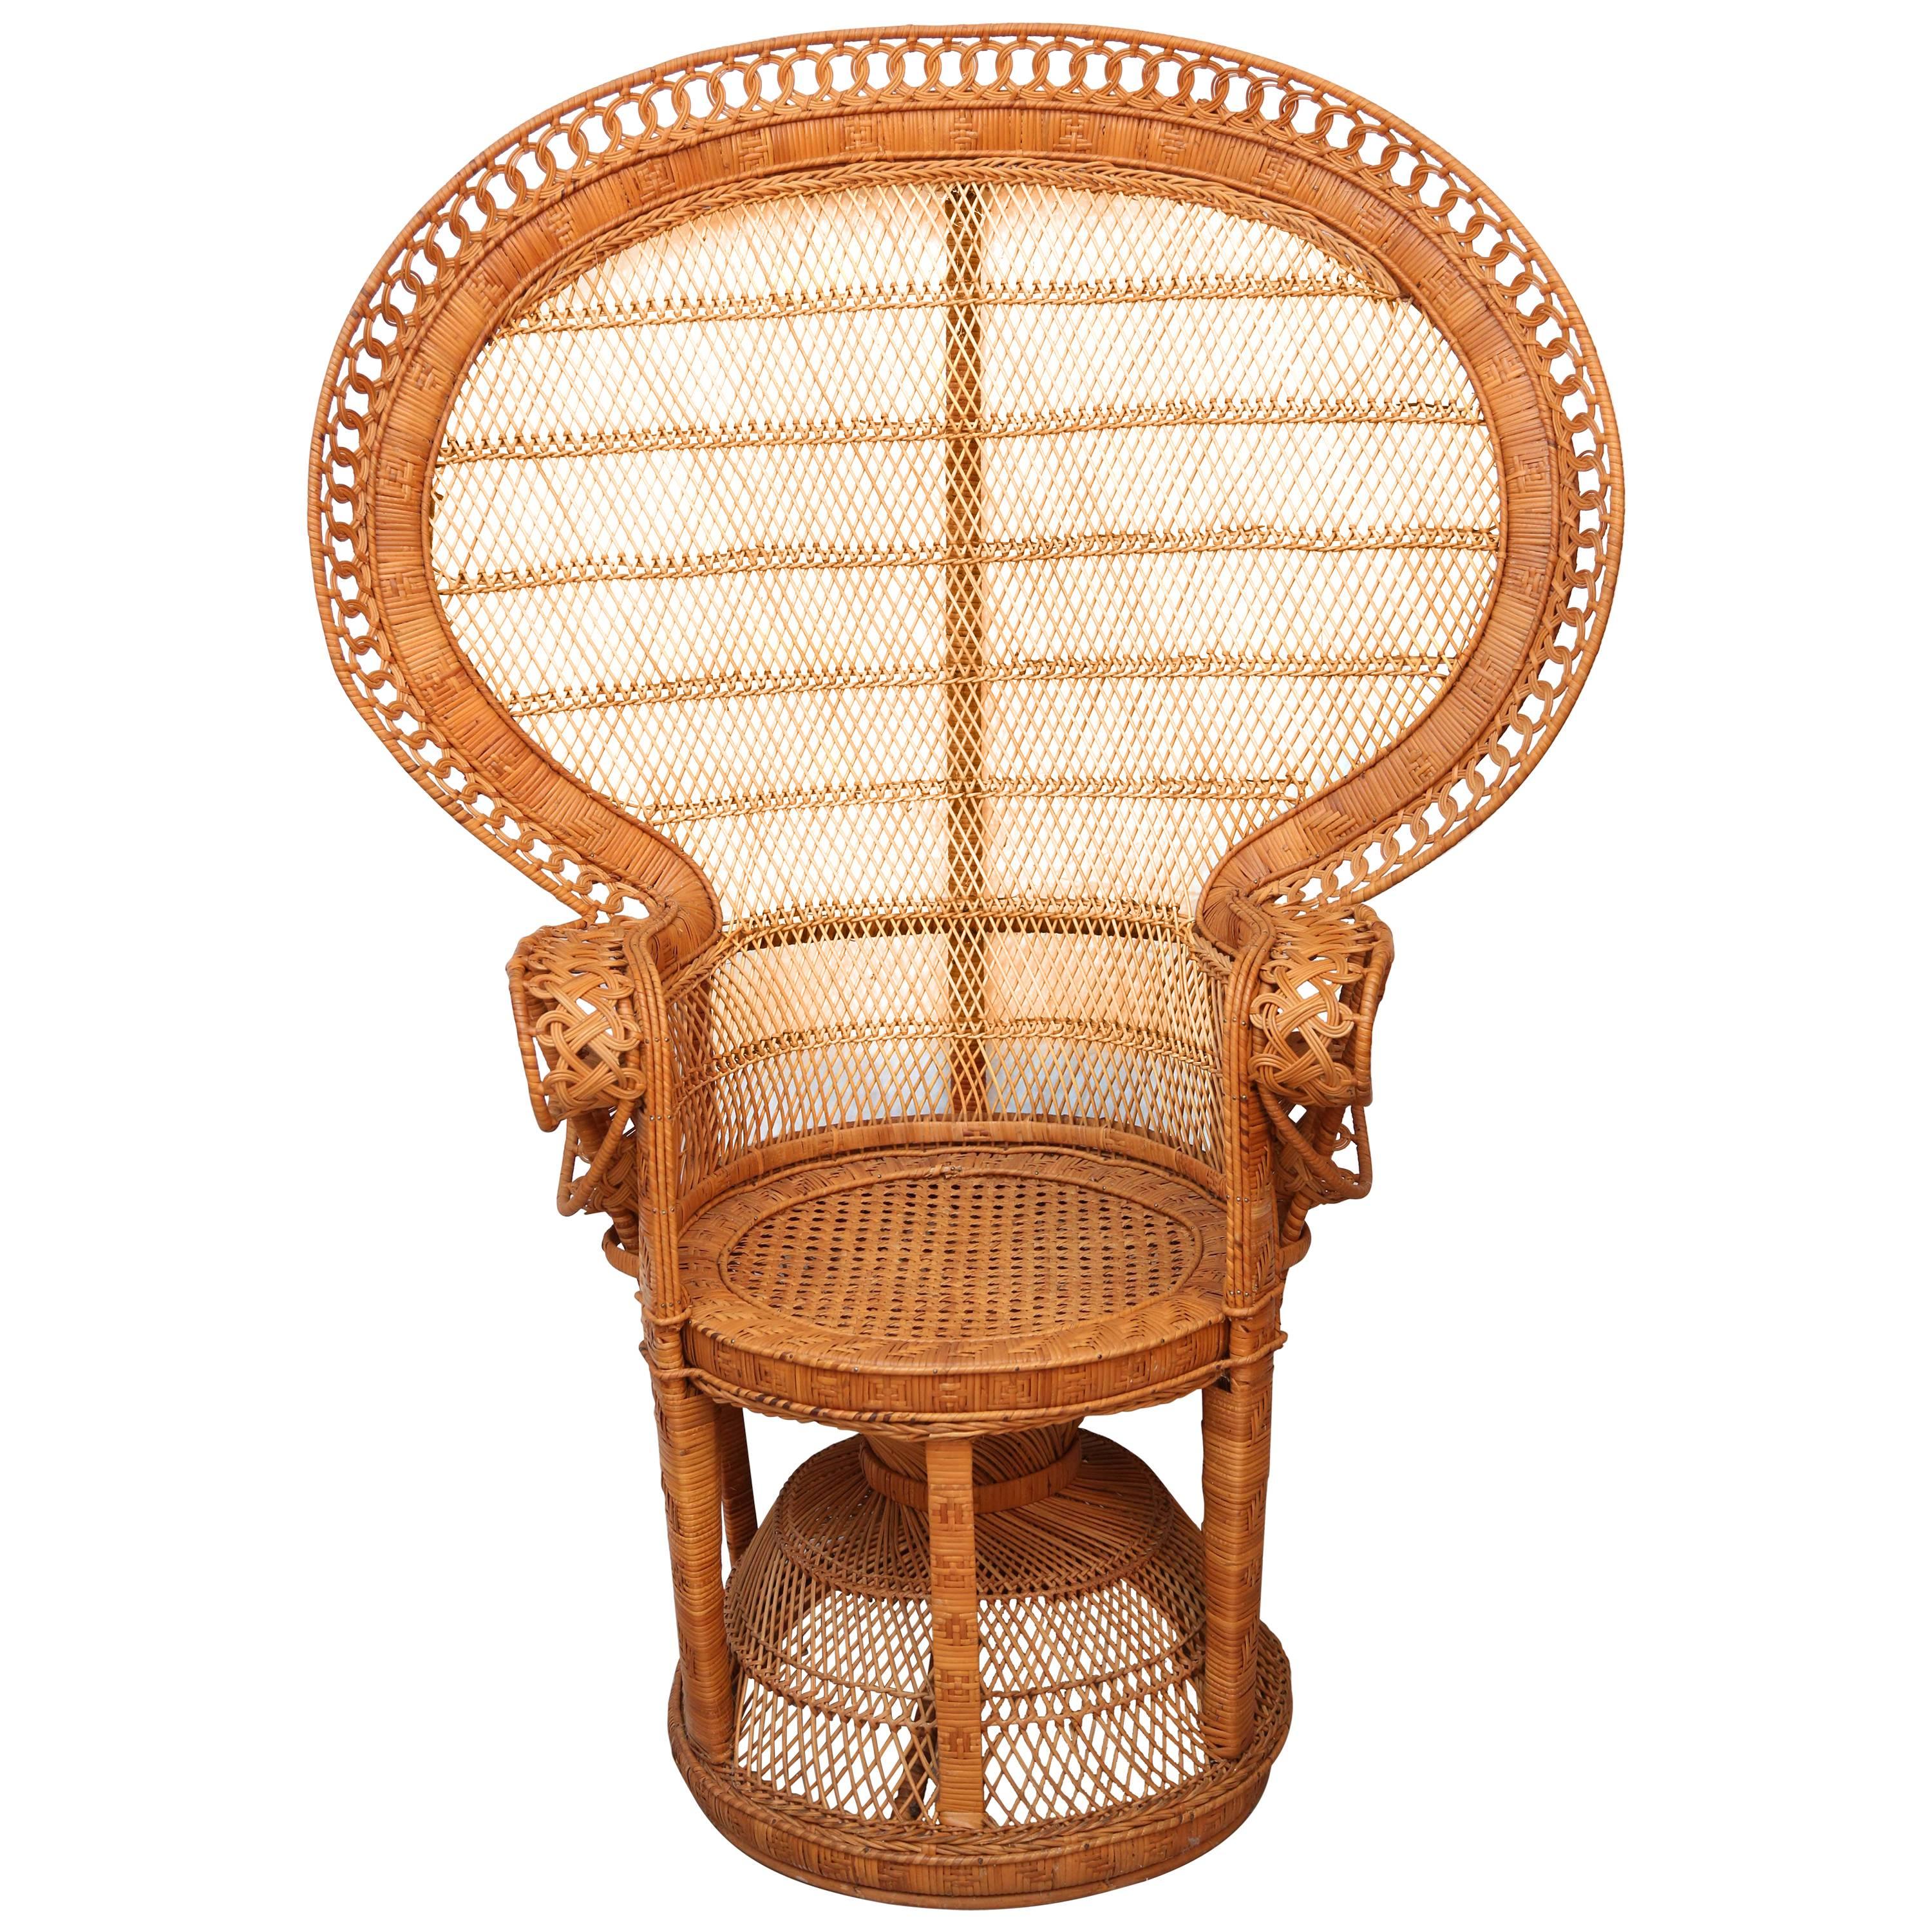 Rattan and Willow "Peacock" Chair